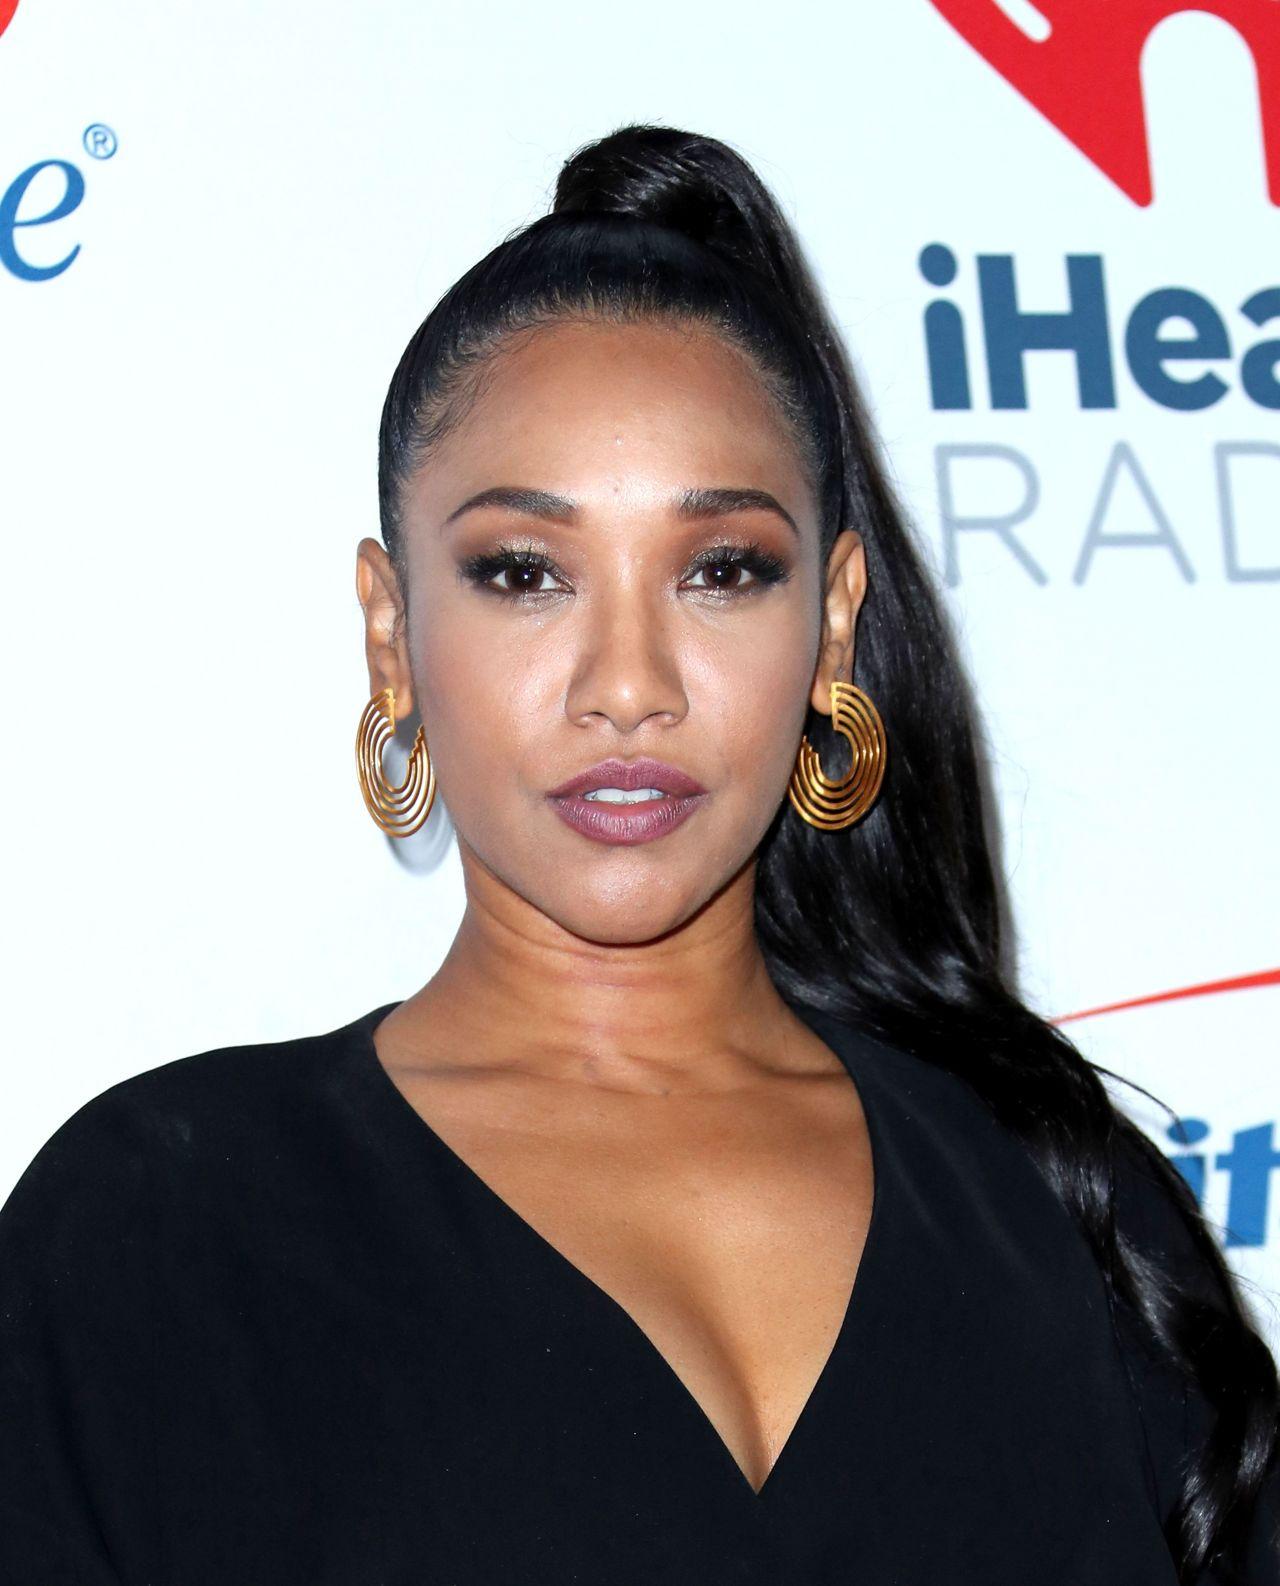 70+ Hot Pictures Of Candice Patton Who Plays Iris West In Flash TV Series 412